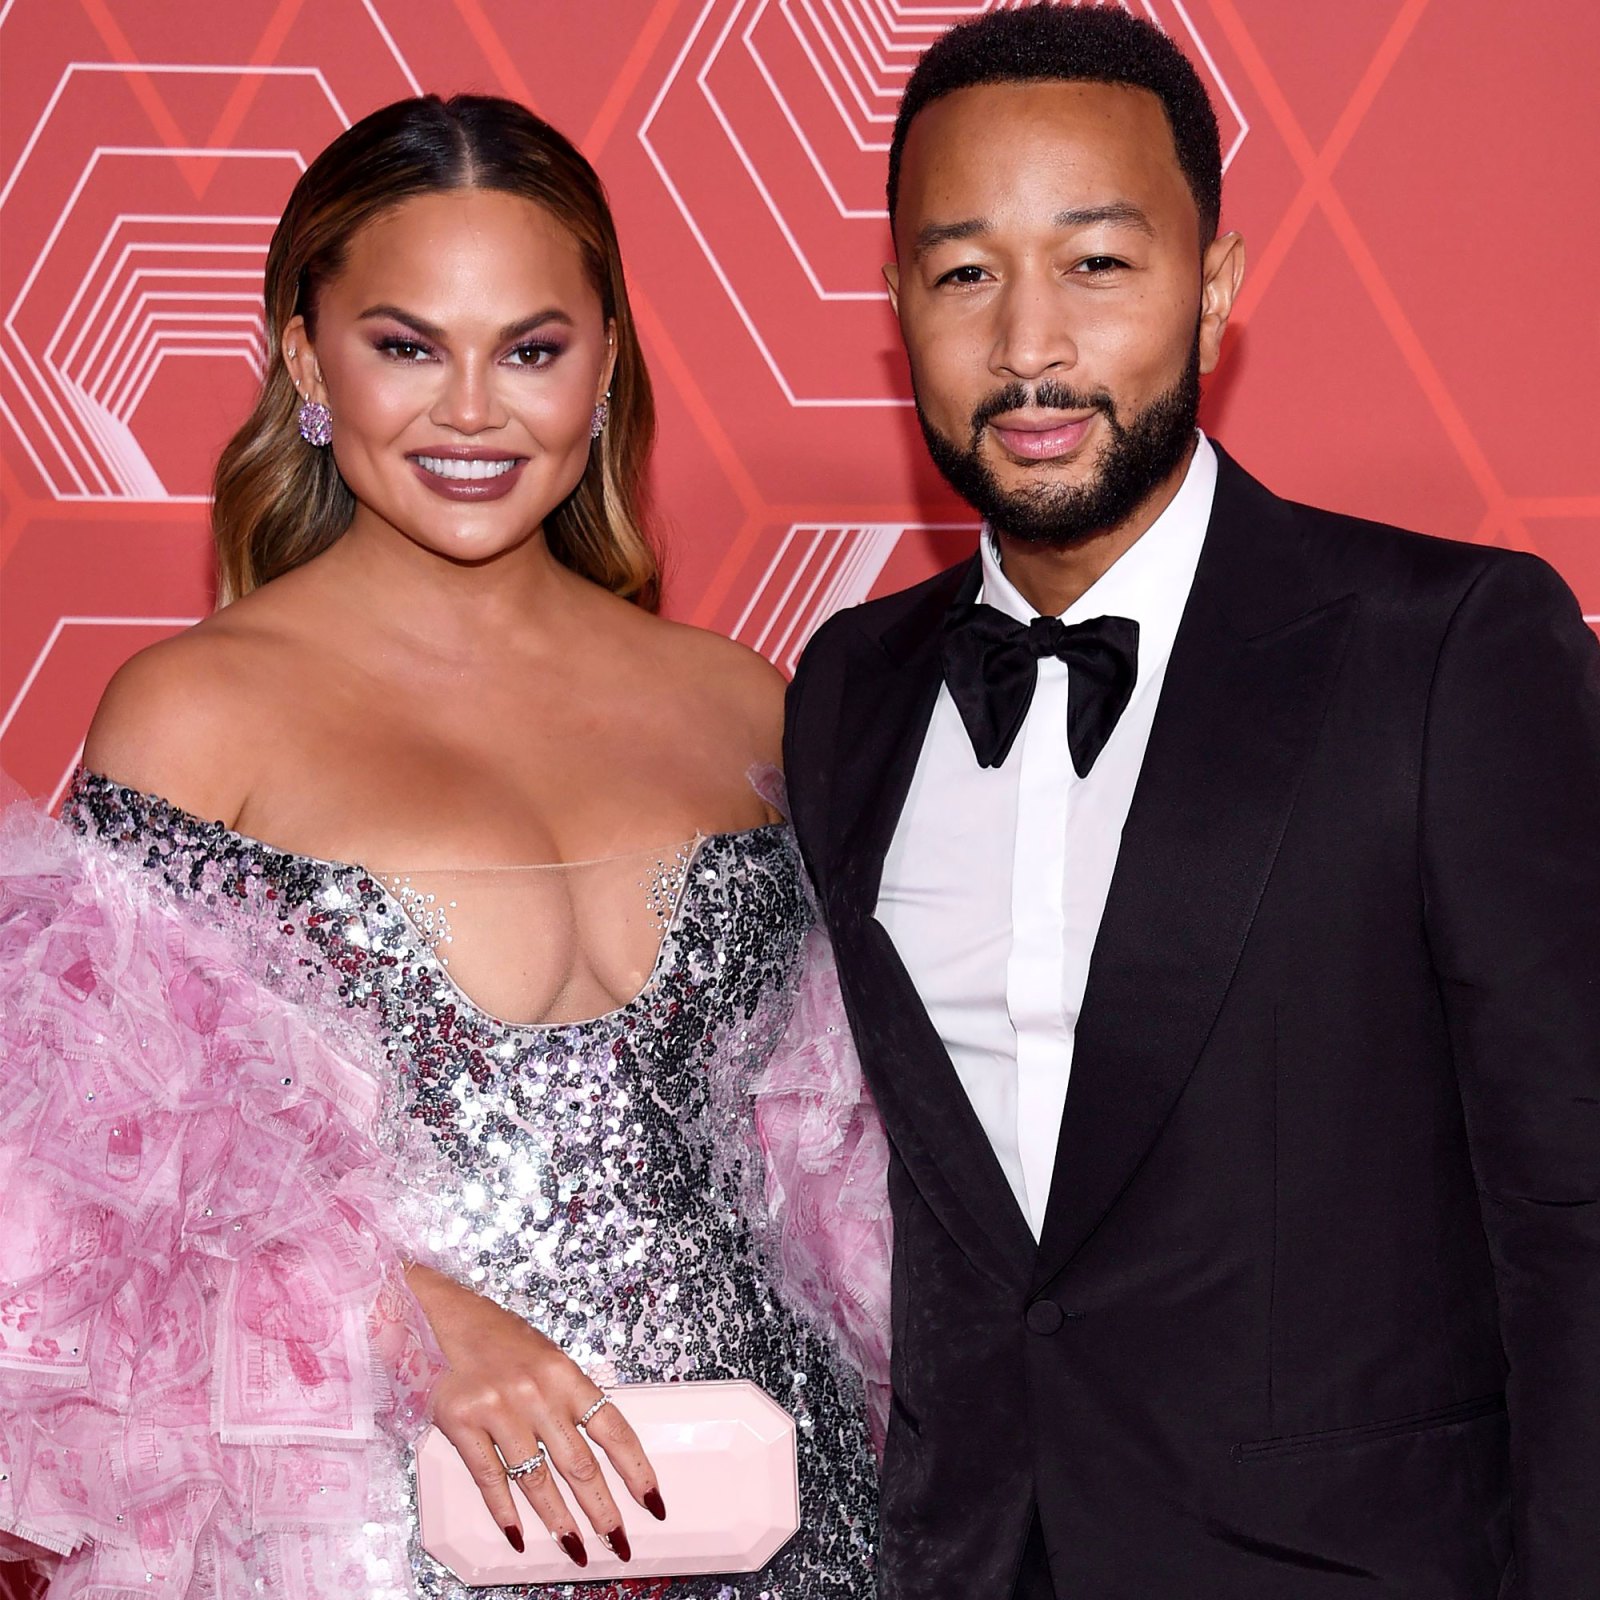 Chrissy Teigen Is Pregnant With Her and John Legend’s Rainbow Baby After Loss of Son Jack